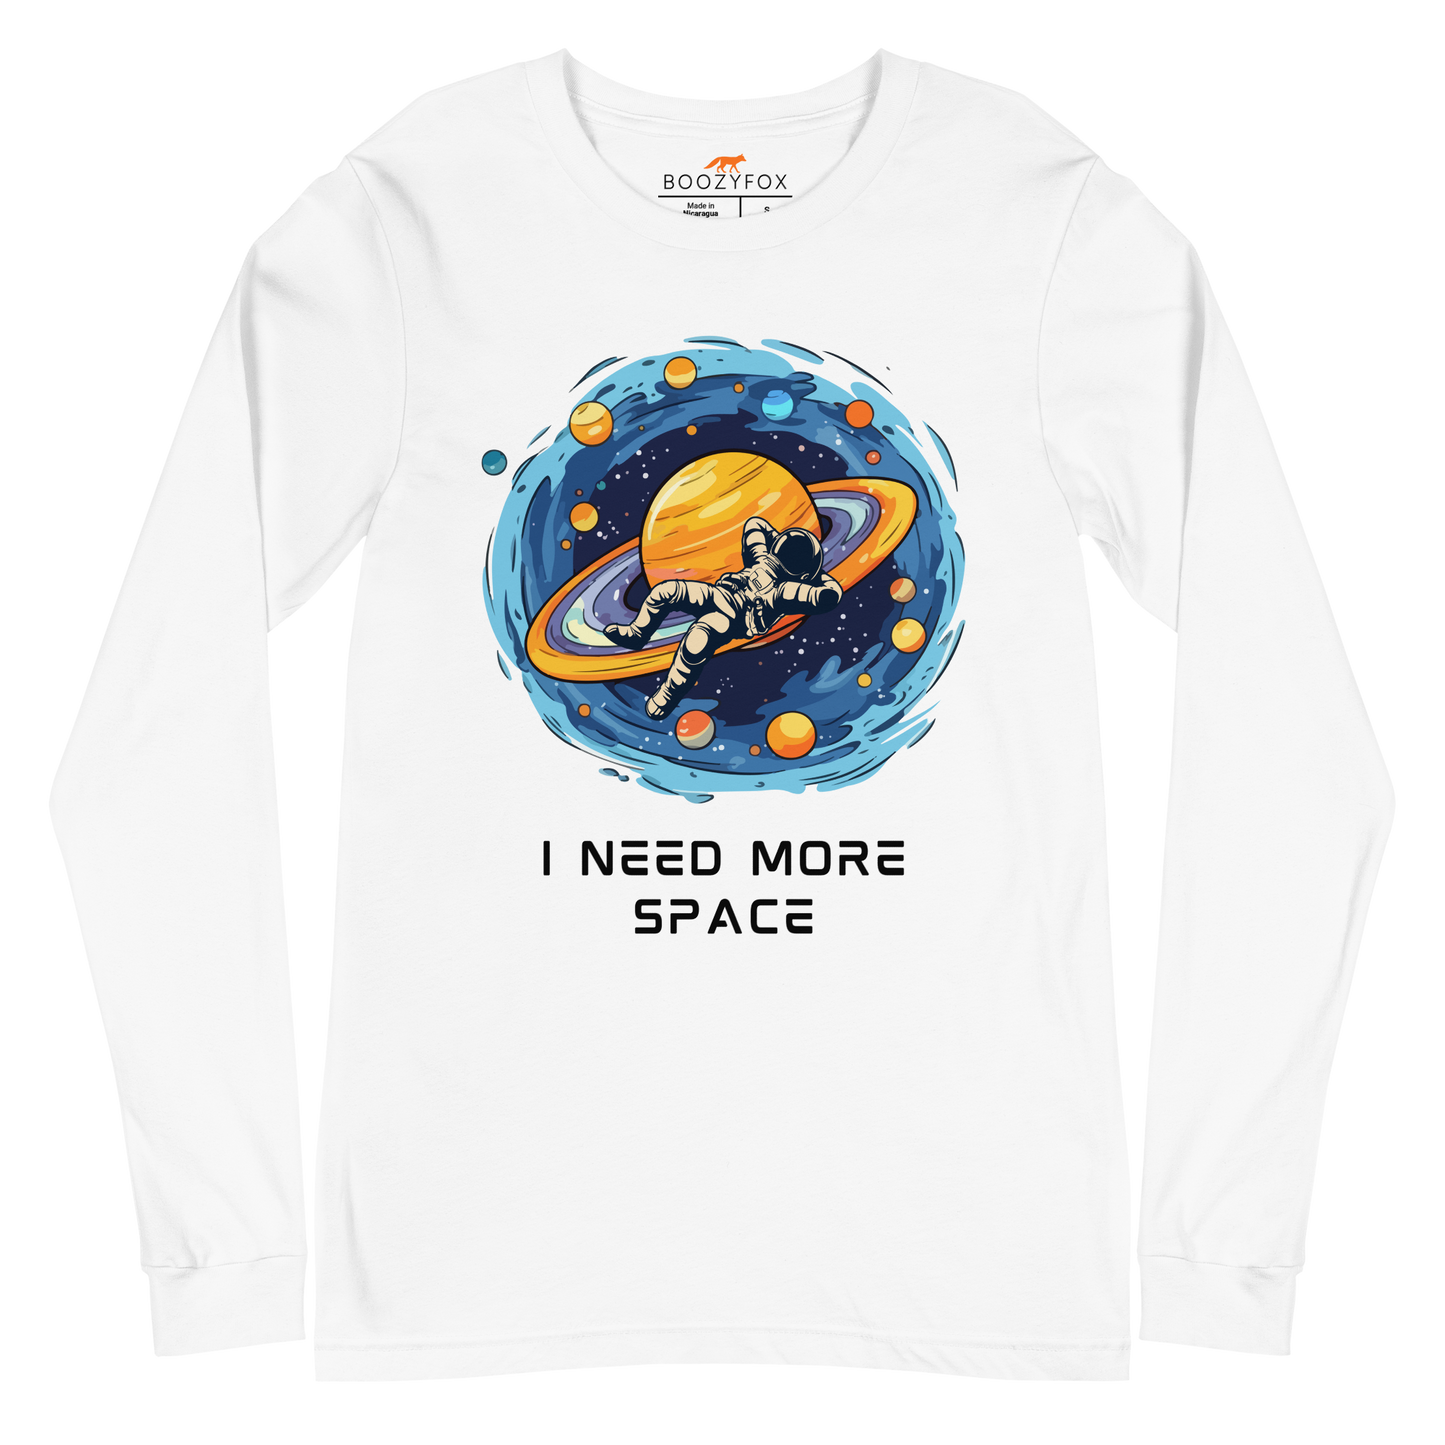 White Astronaut Long Sleeve Tee featuring a captivating I Need More Space graphic on the chest - Funny Space Long Sleeve Graphic Tees - Boozy Fox